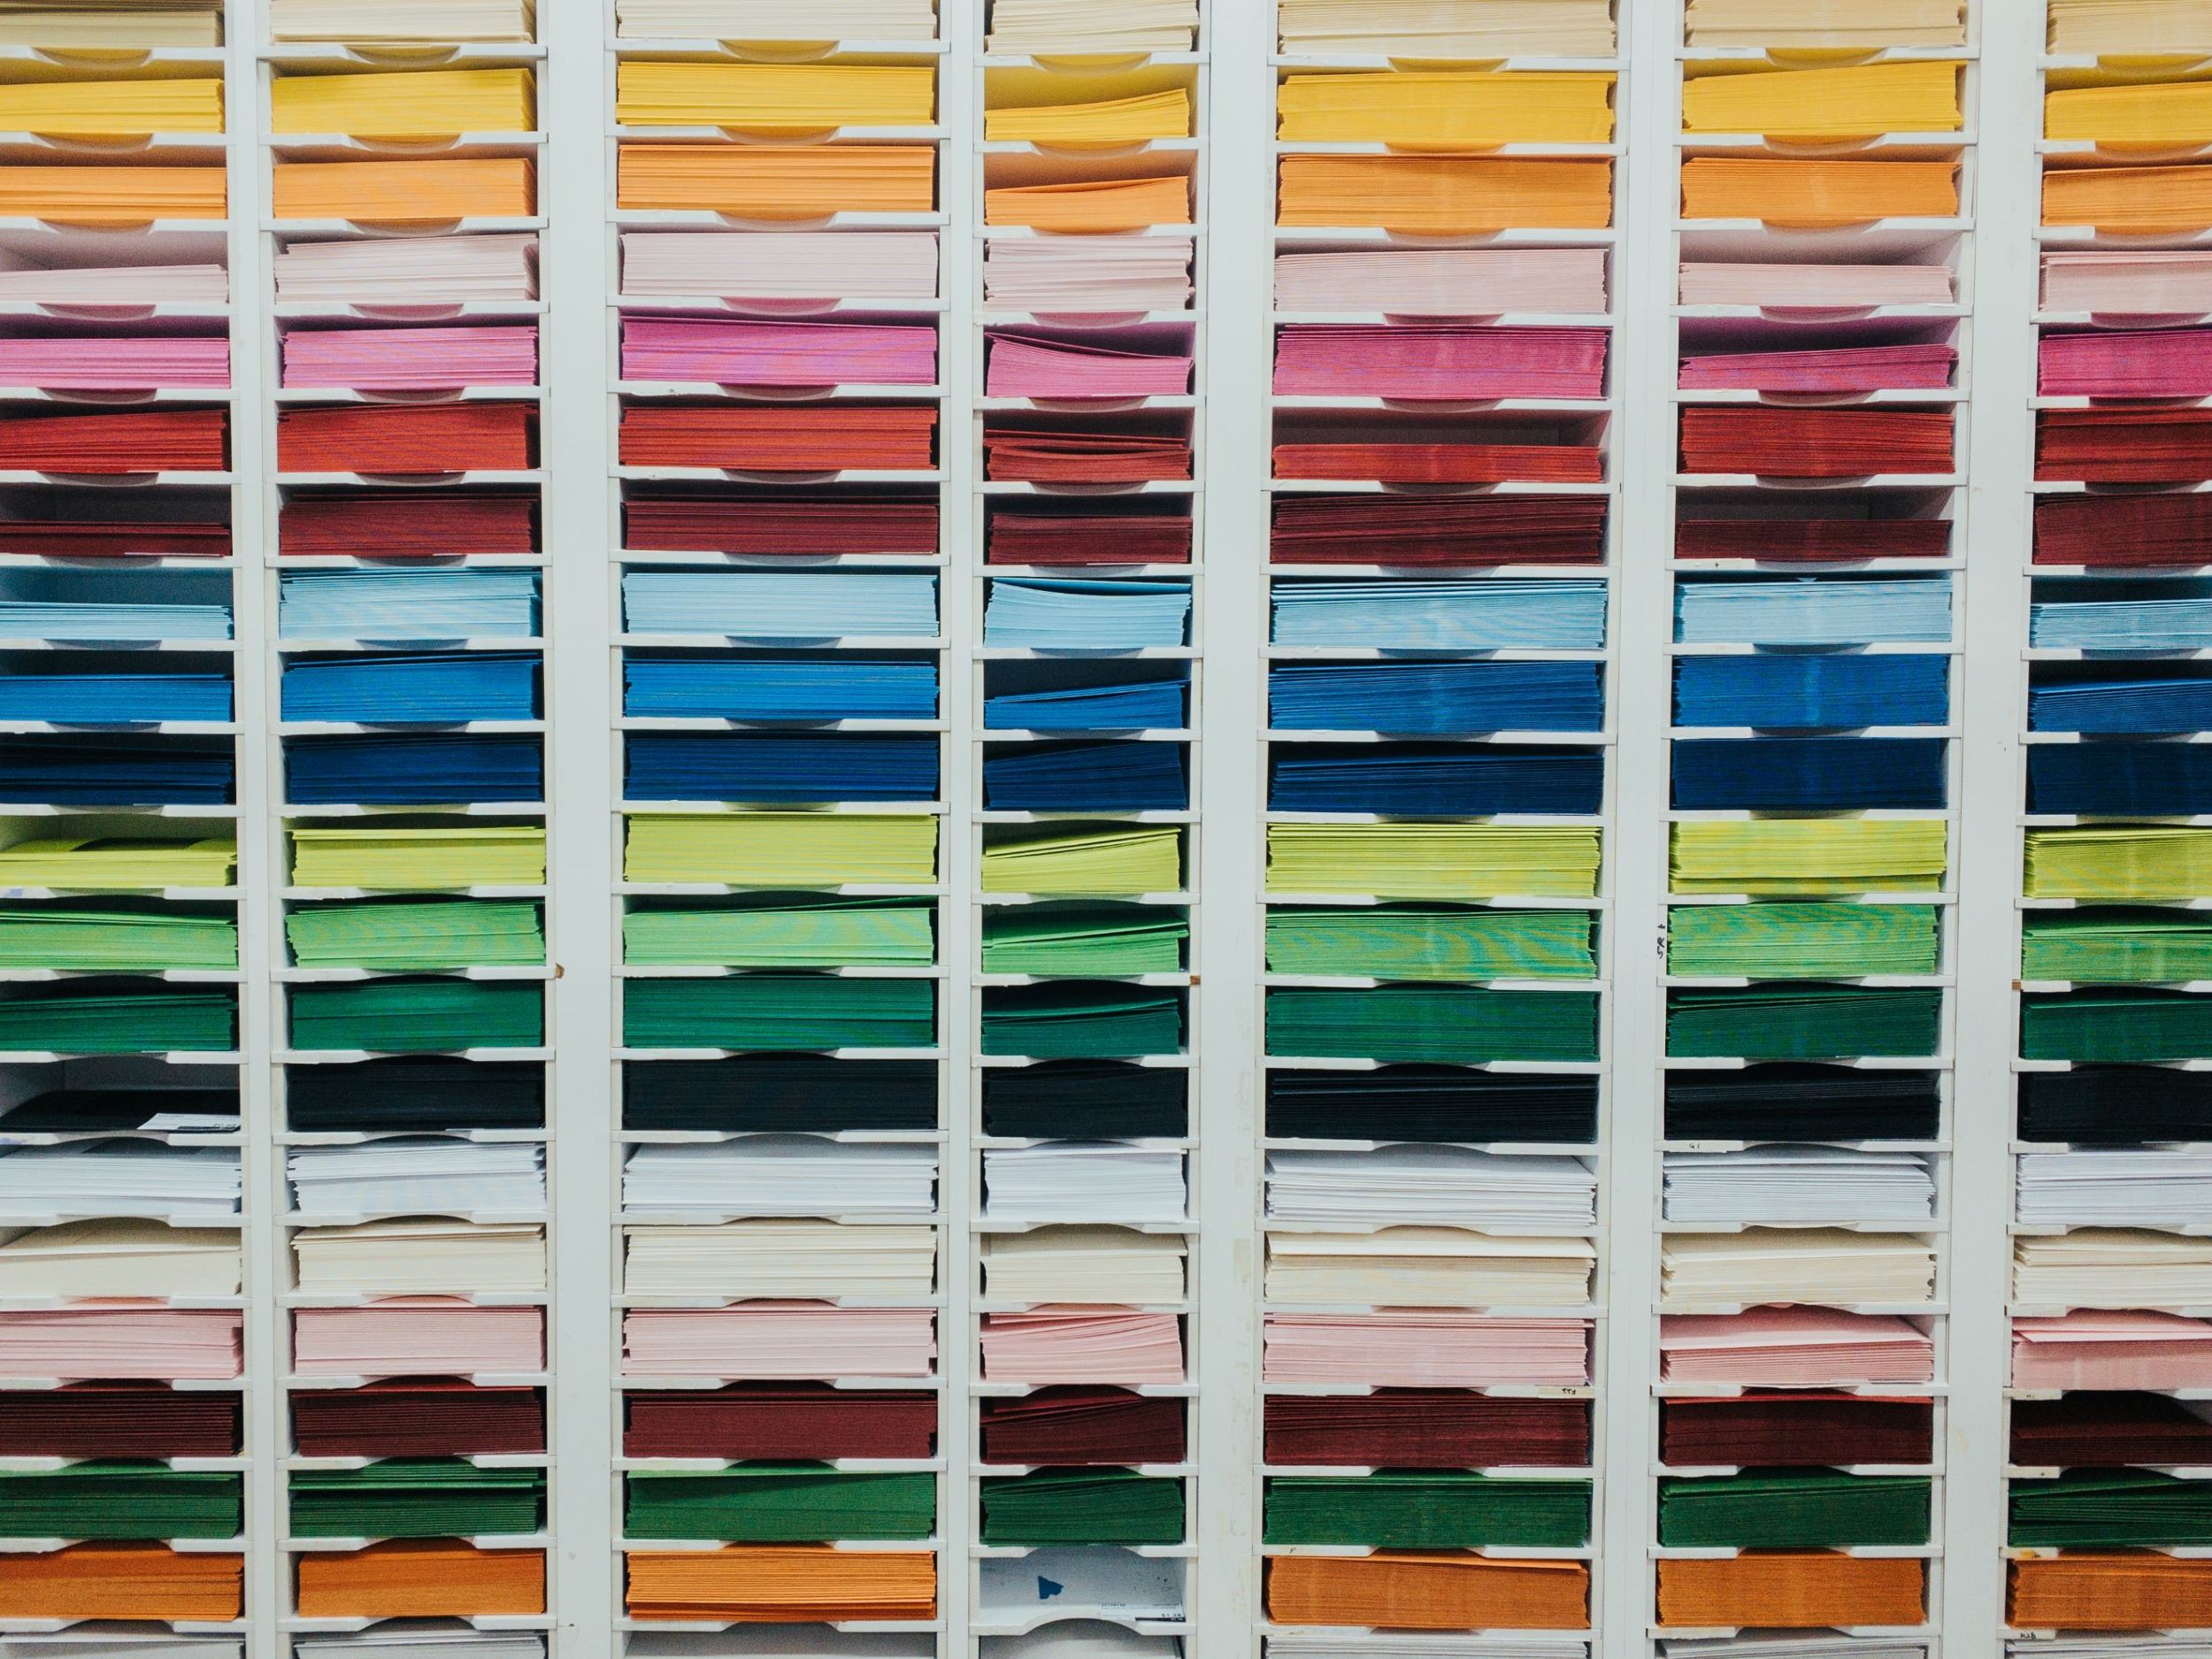 stacks of colorful paper